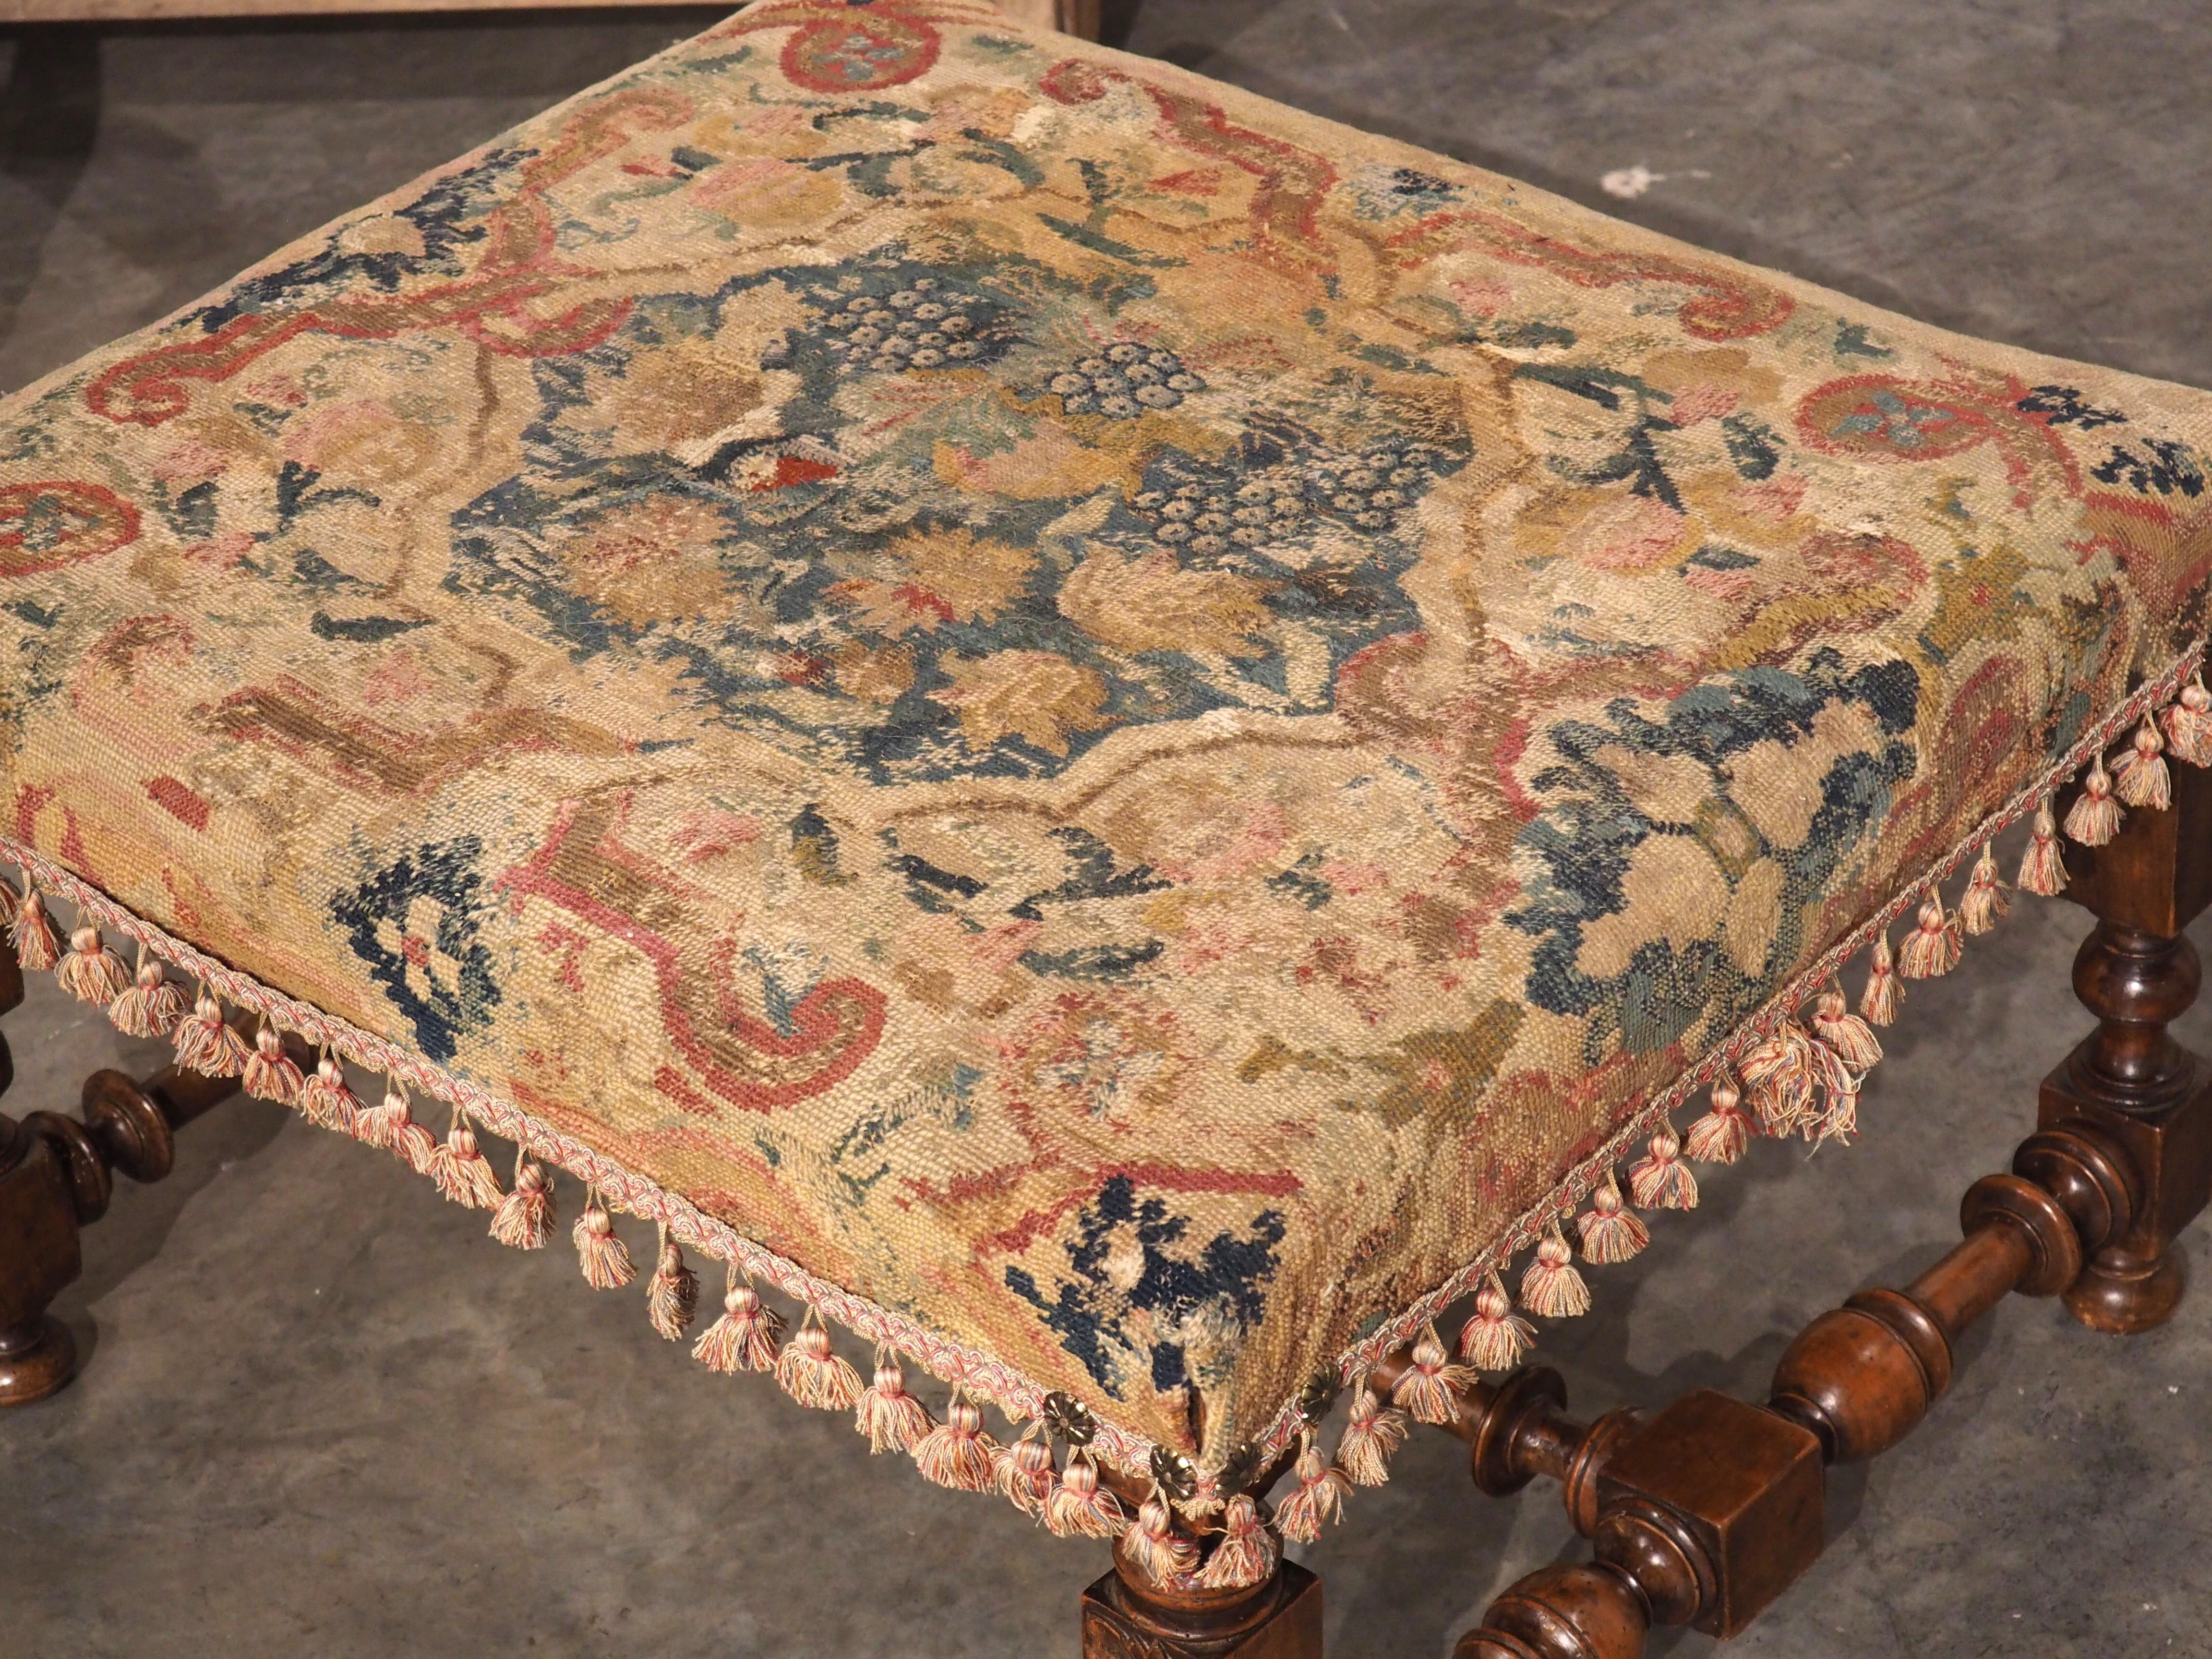 Hand-Carved Large Antique French Louis XIII Style Tabouret, Needlepoint Upholstery, C. 1870